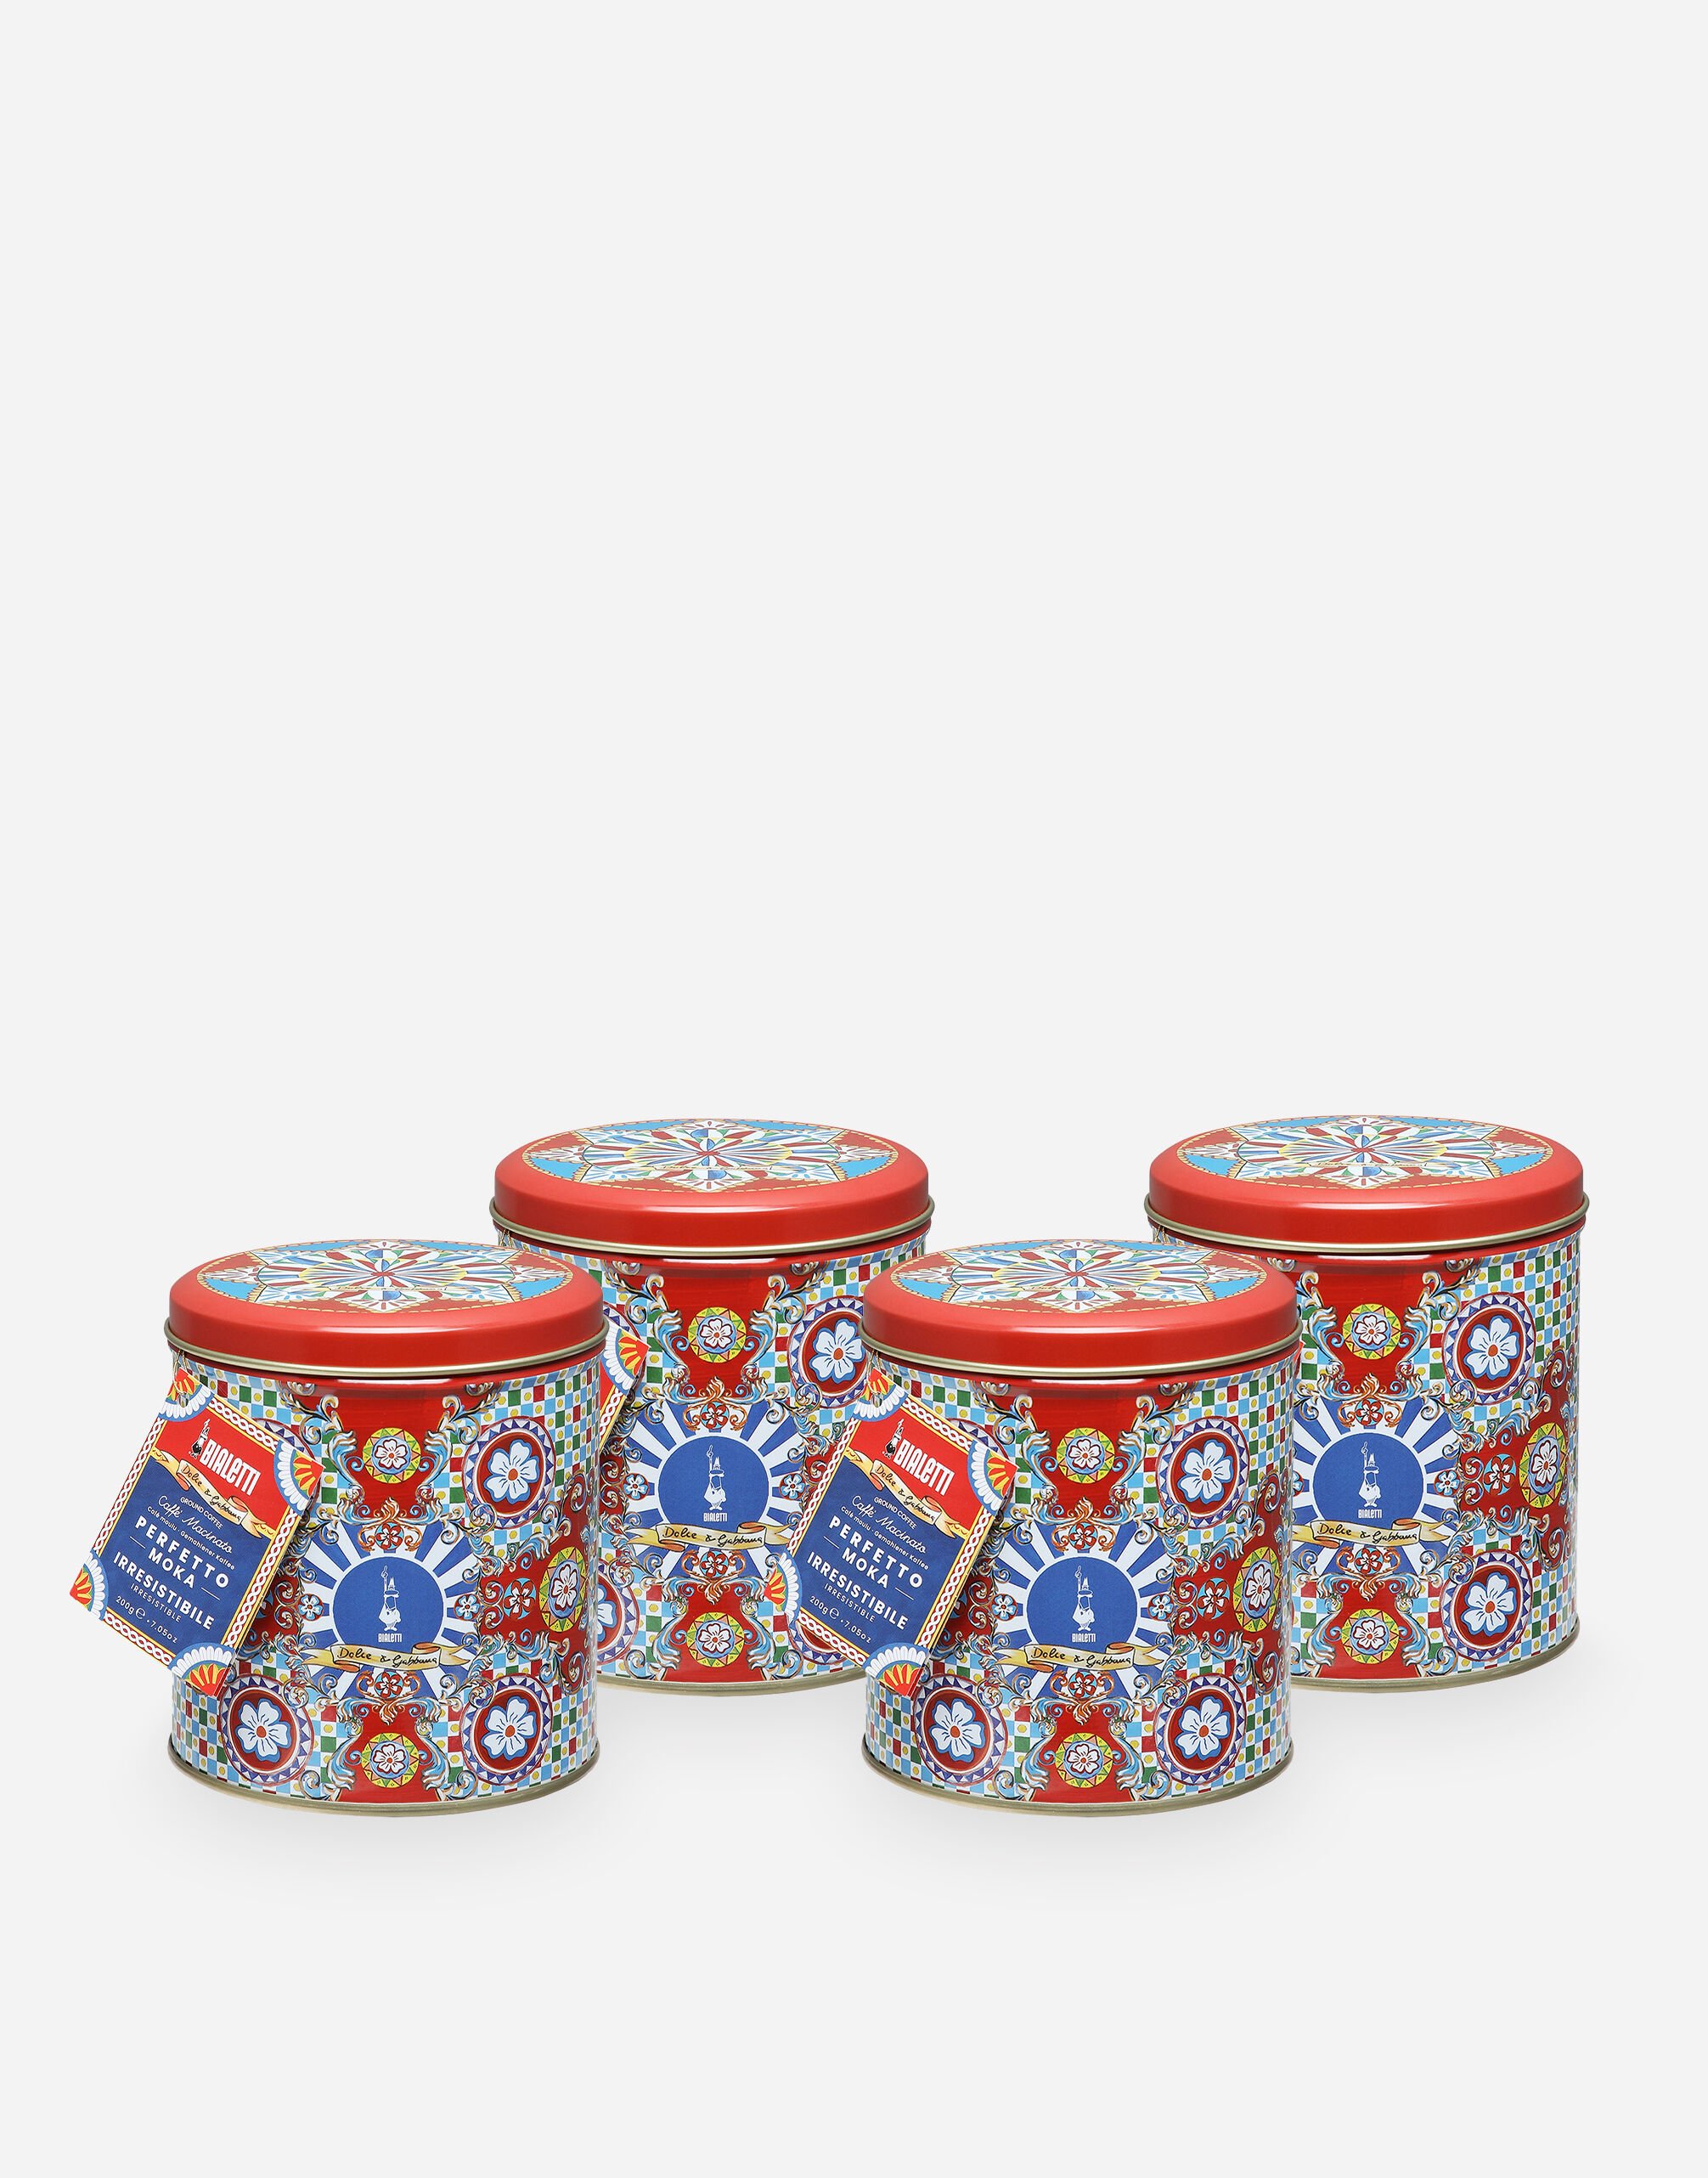 Dolce & Gabbana 4 Coffee Canisters BIALETTI DOLCE&GABBANA Multicolor TCK014TCAFM